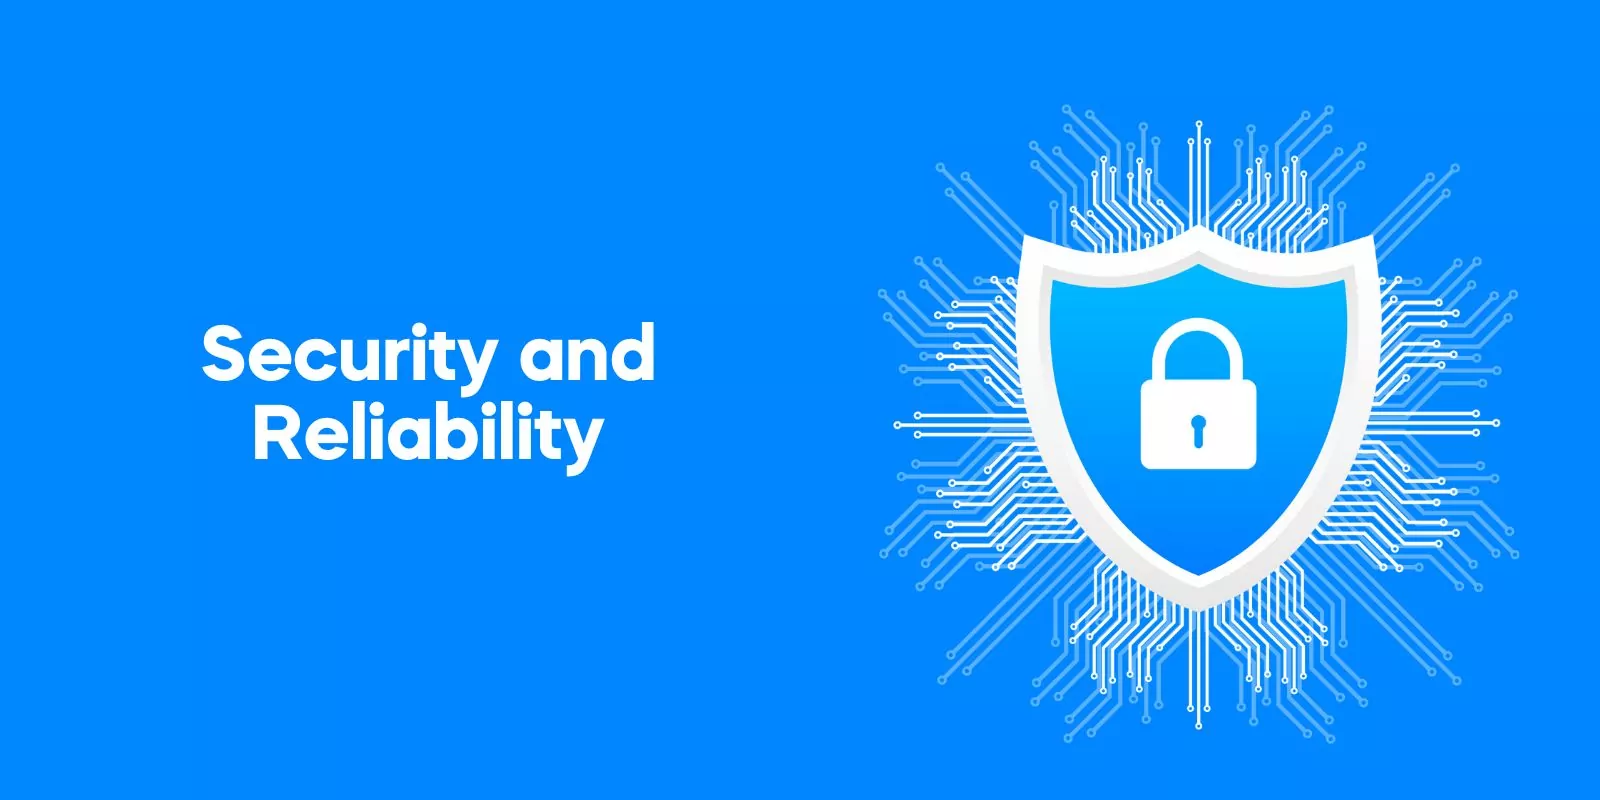 Security and Reliability